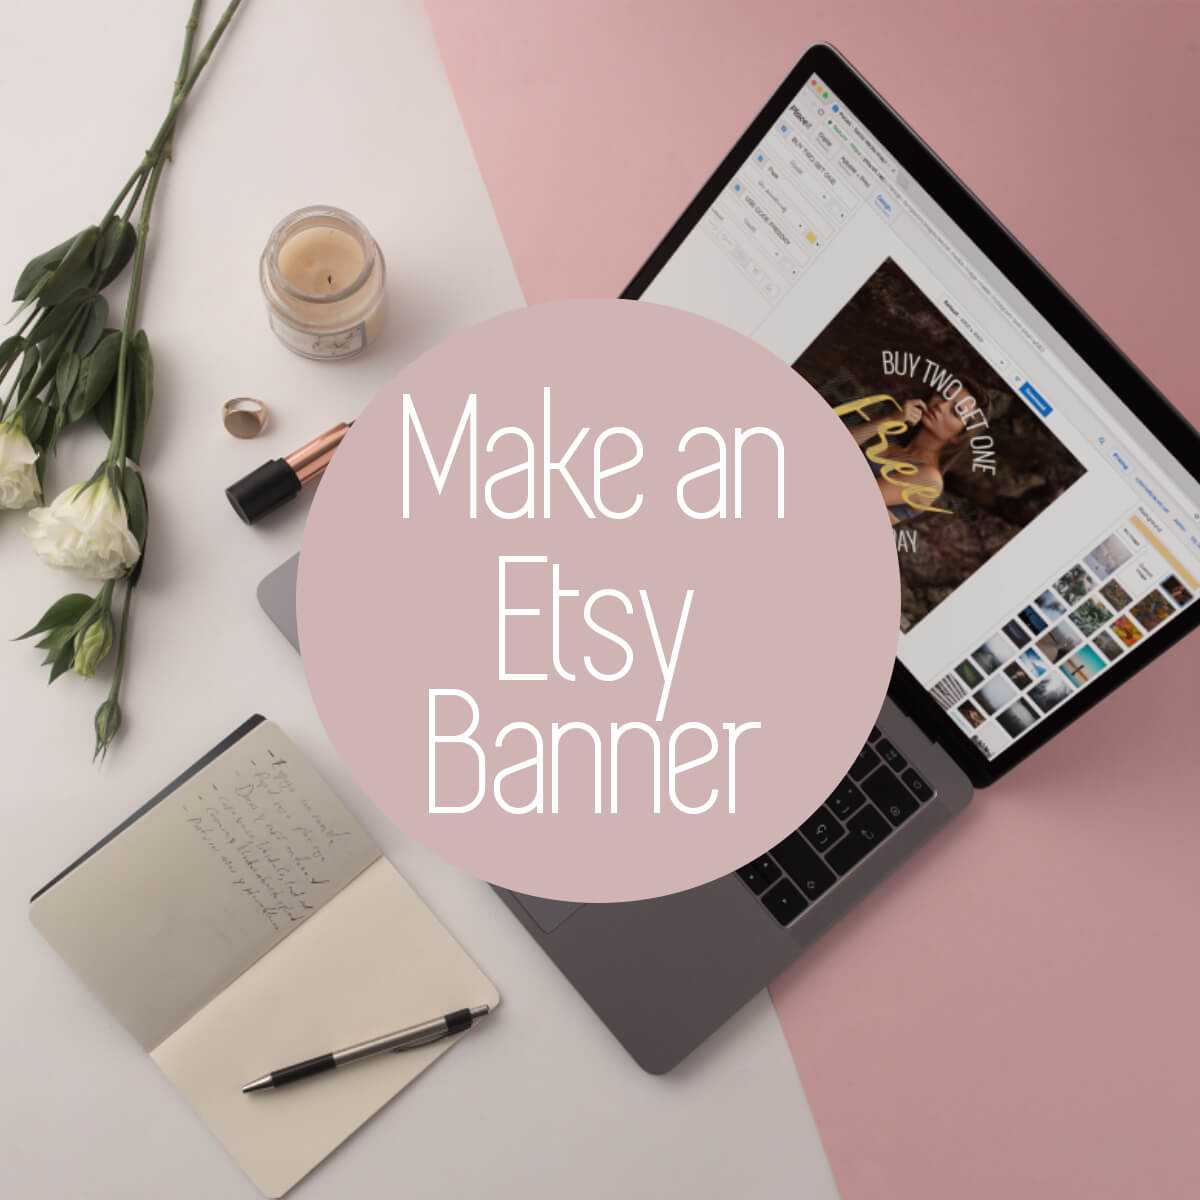 Personalize Your Etsy Shop – Cover Photos And Banners With Free Etsy Banner Template